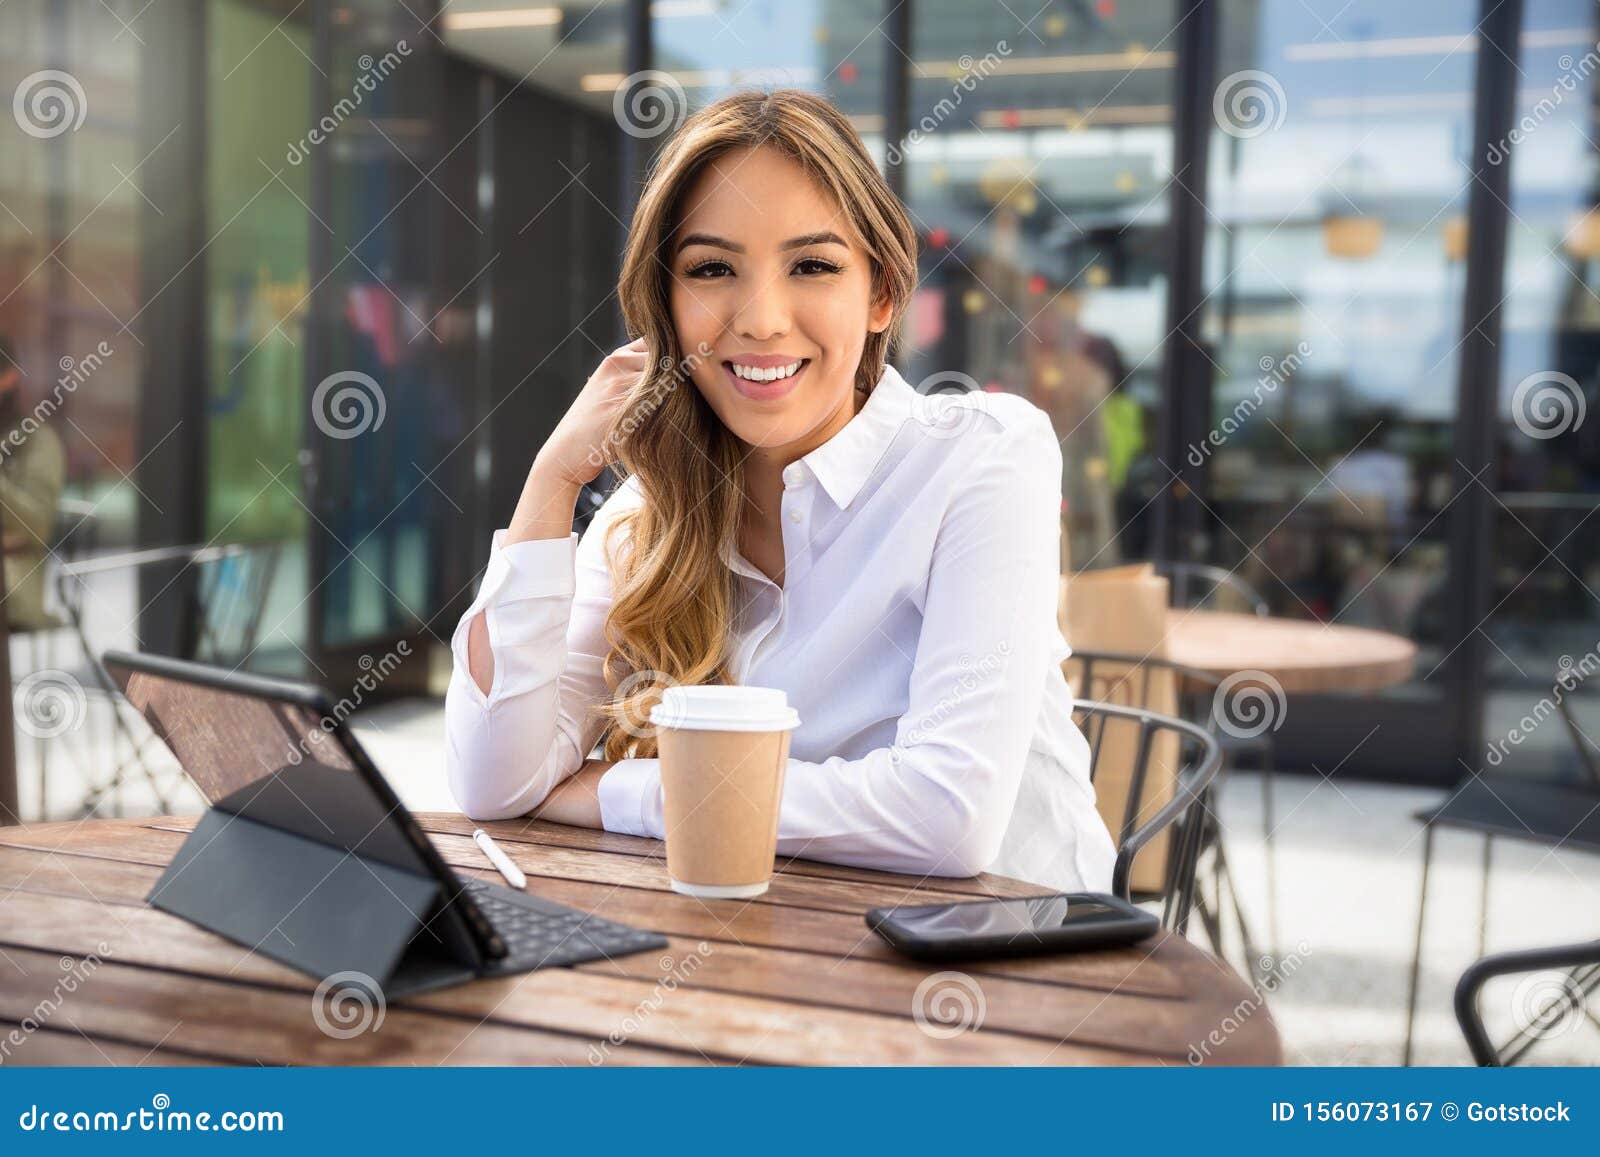 independent multiethnic female entrepreneur, web business owner, young self-employed professional working from laptop at coffee sh